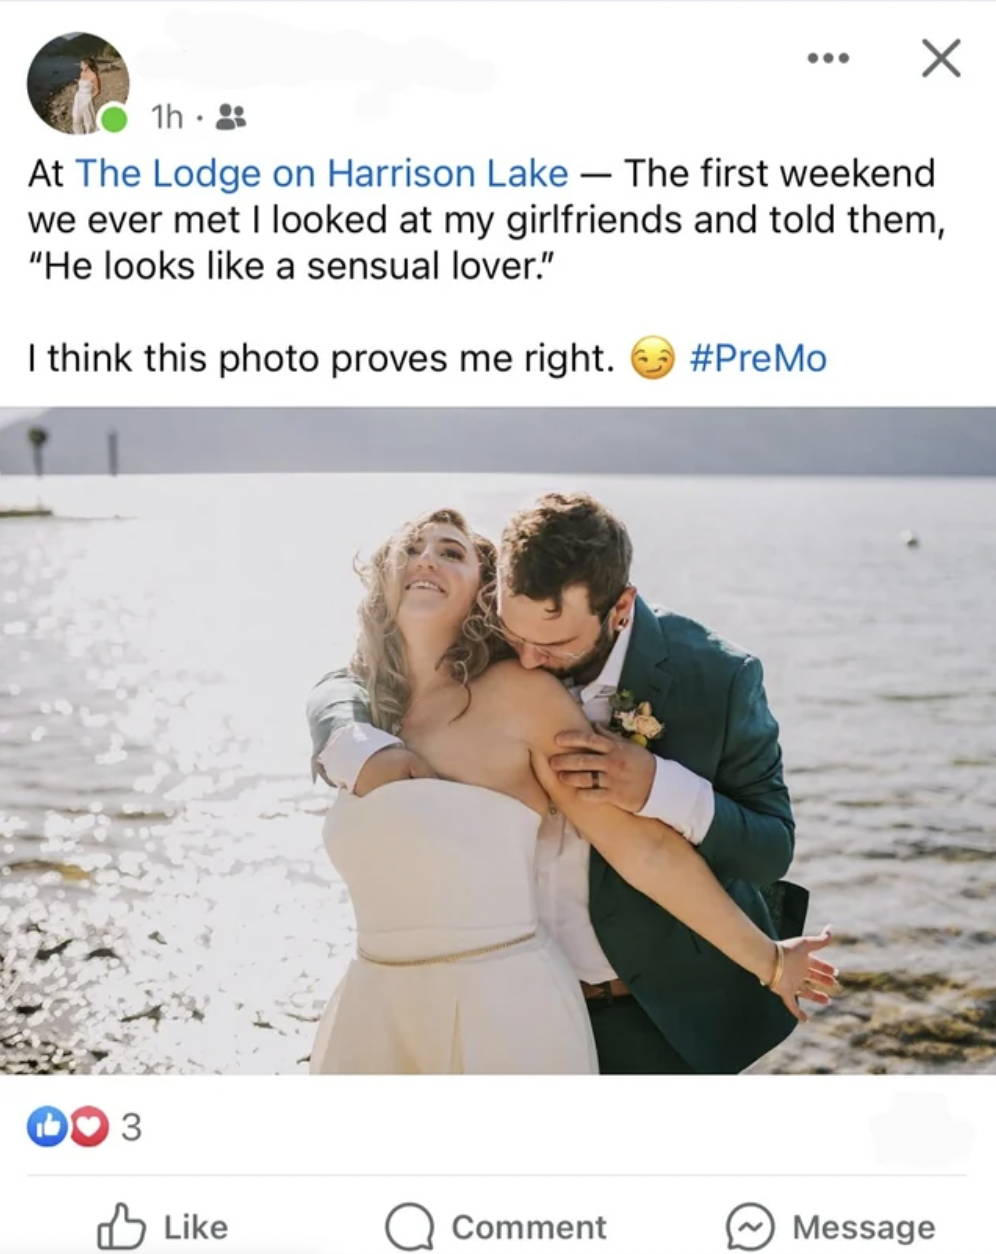 cringe pics - photograph - 1h2 At The Lodge on Harrison Lake The first weekend we ever met I looked at my girlfriends and told them, "He looks a sensual lover." I think this photo proves me right. 3 Comment X Message